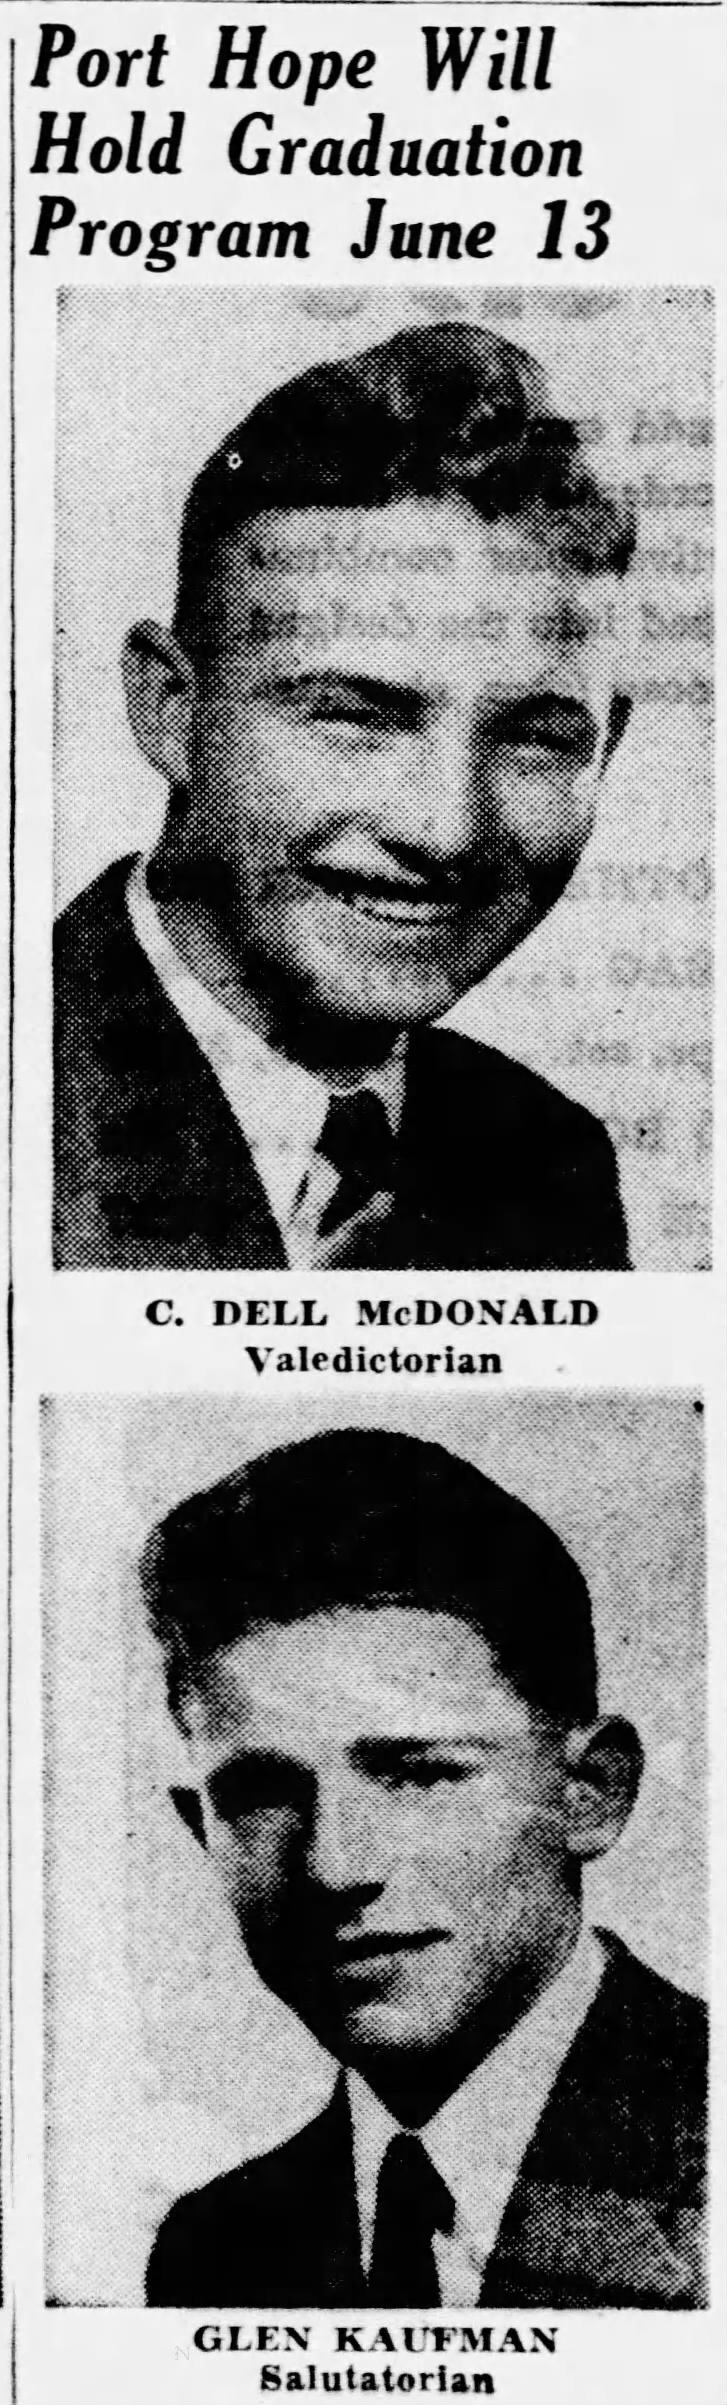 26 May 1946 - Port Hope Honored Students Page 1